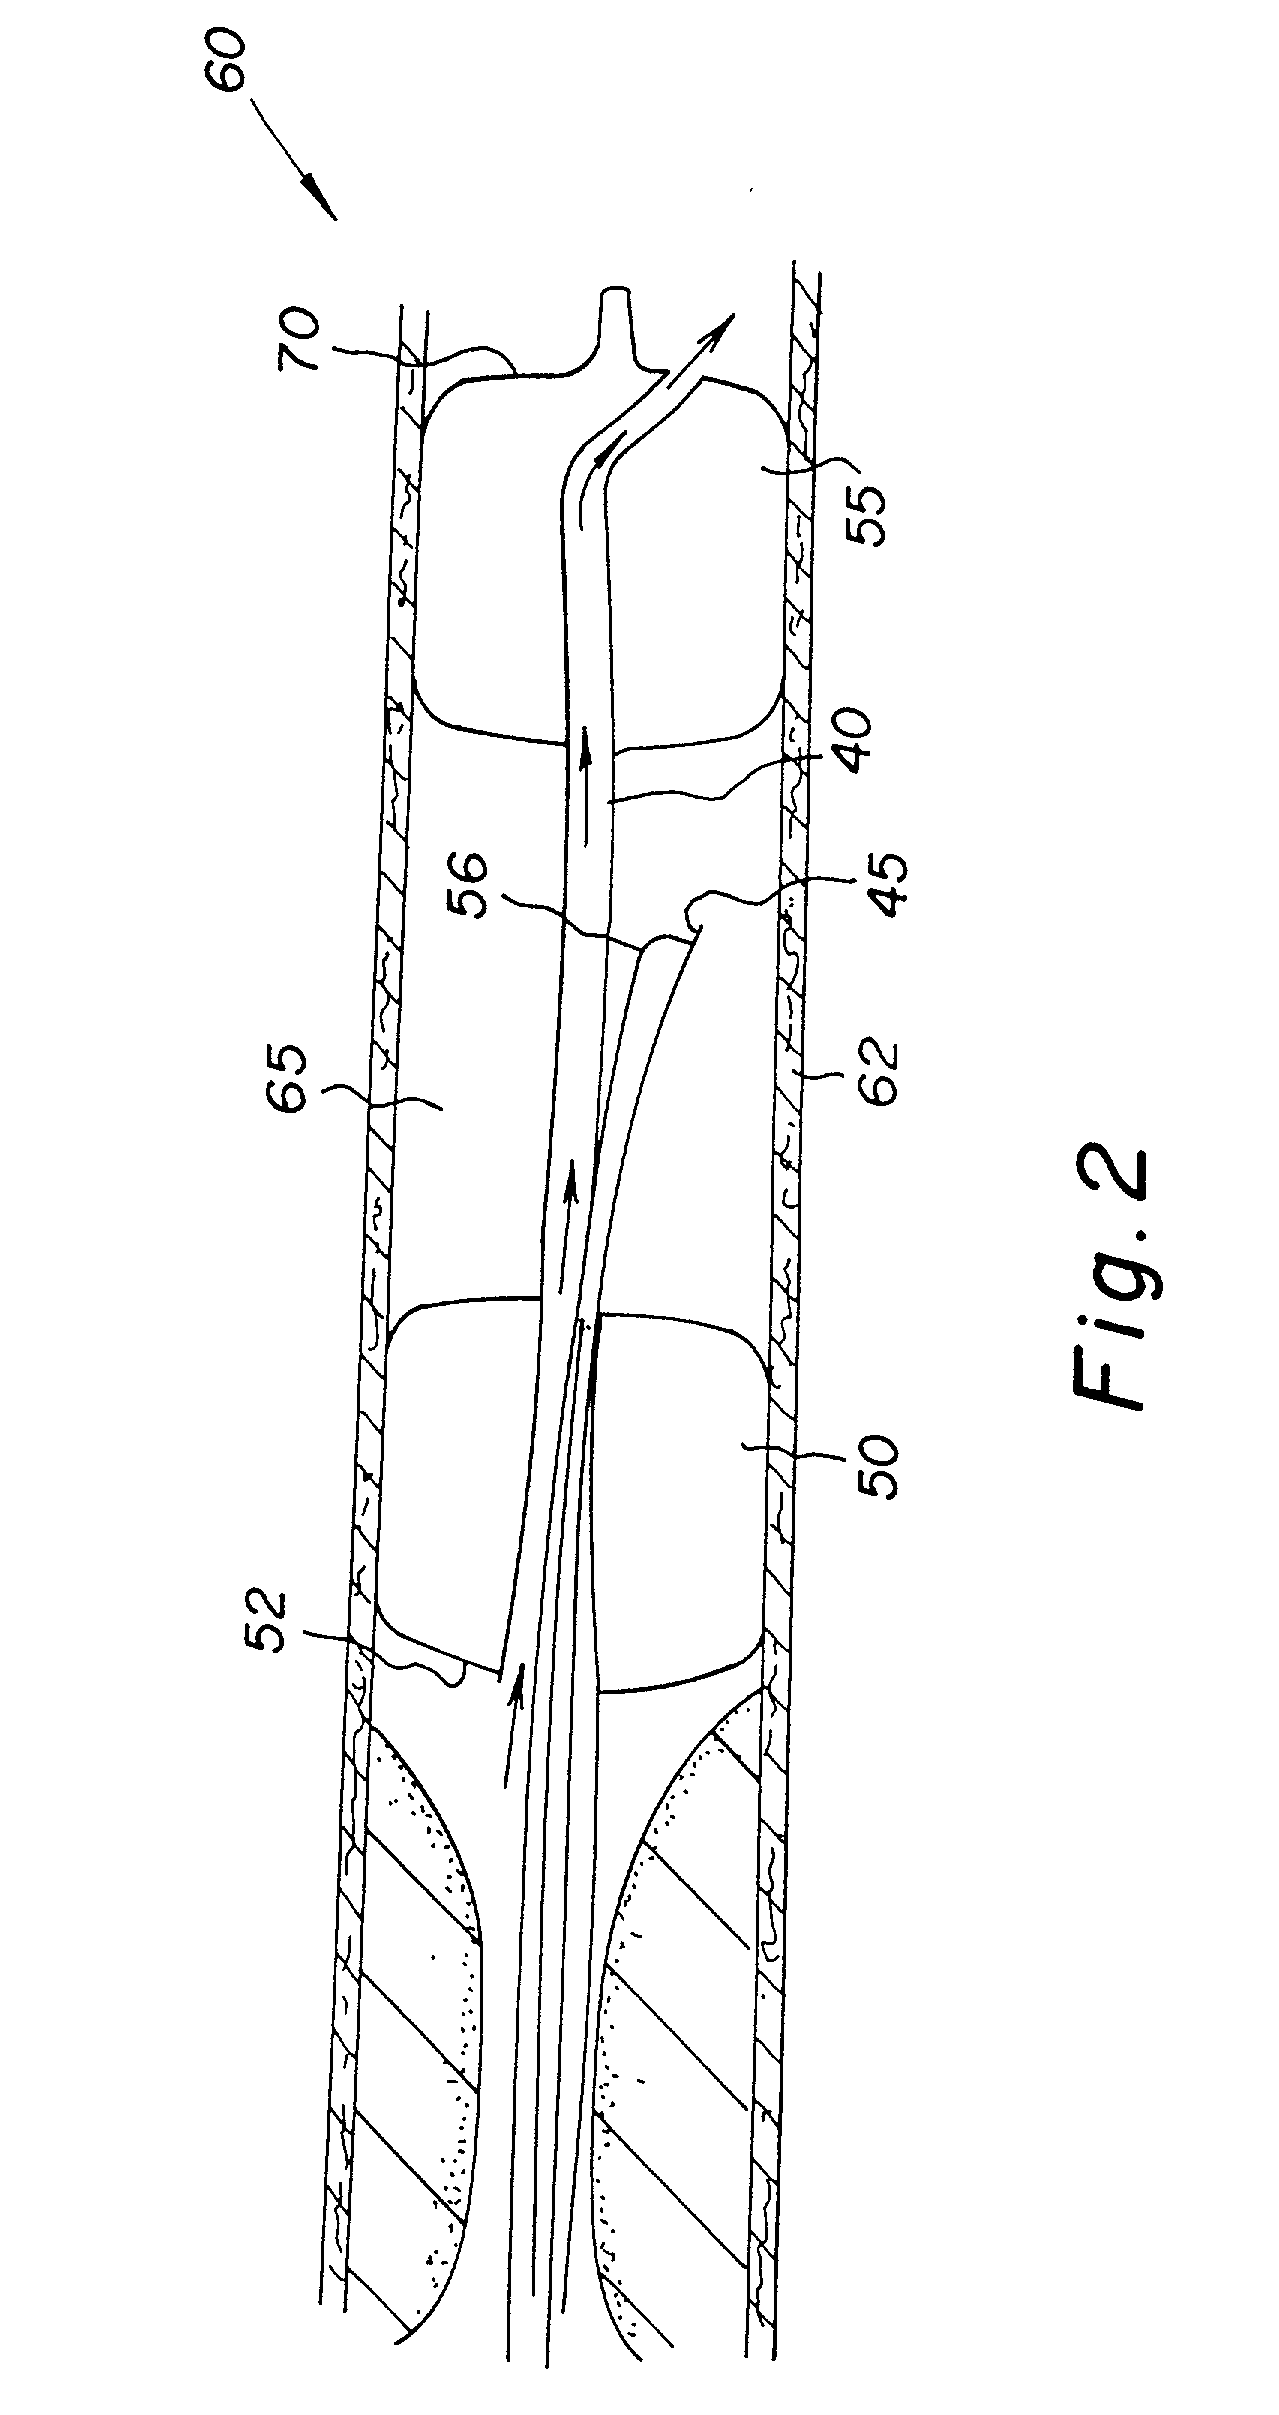 Method and apparatus for performing an anastamosis